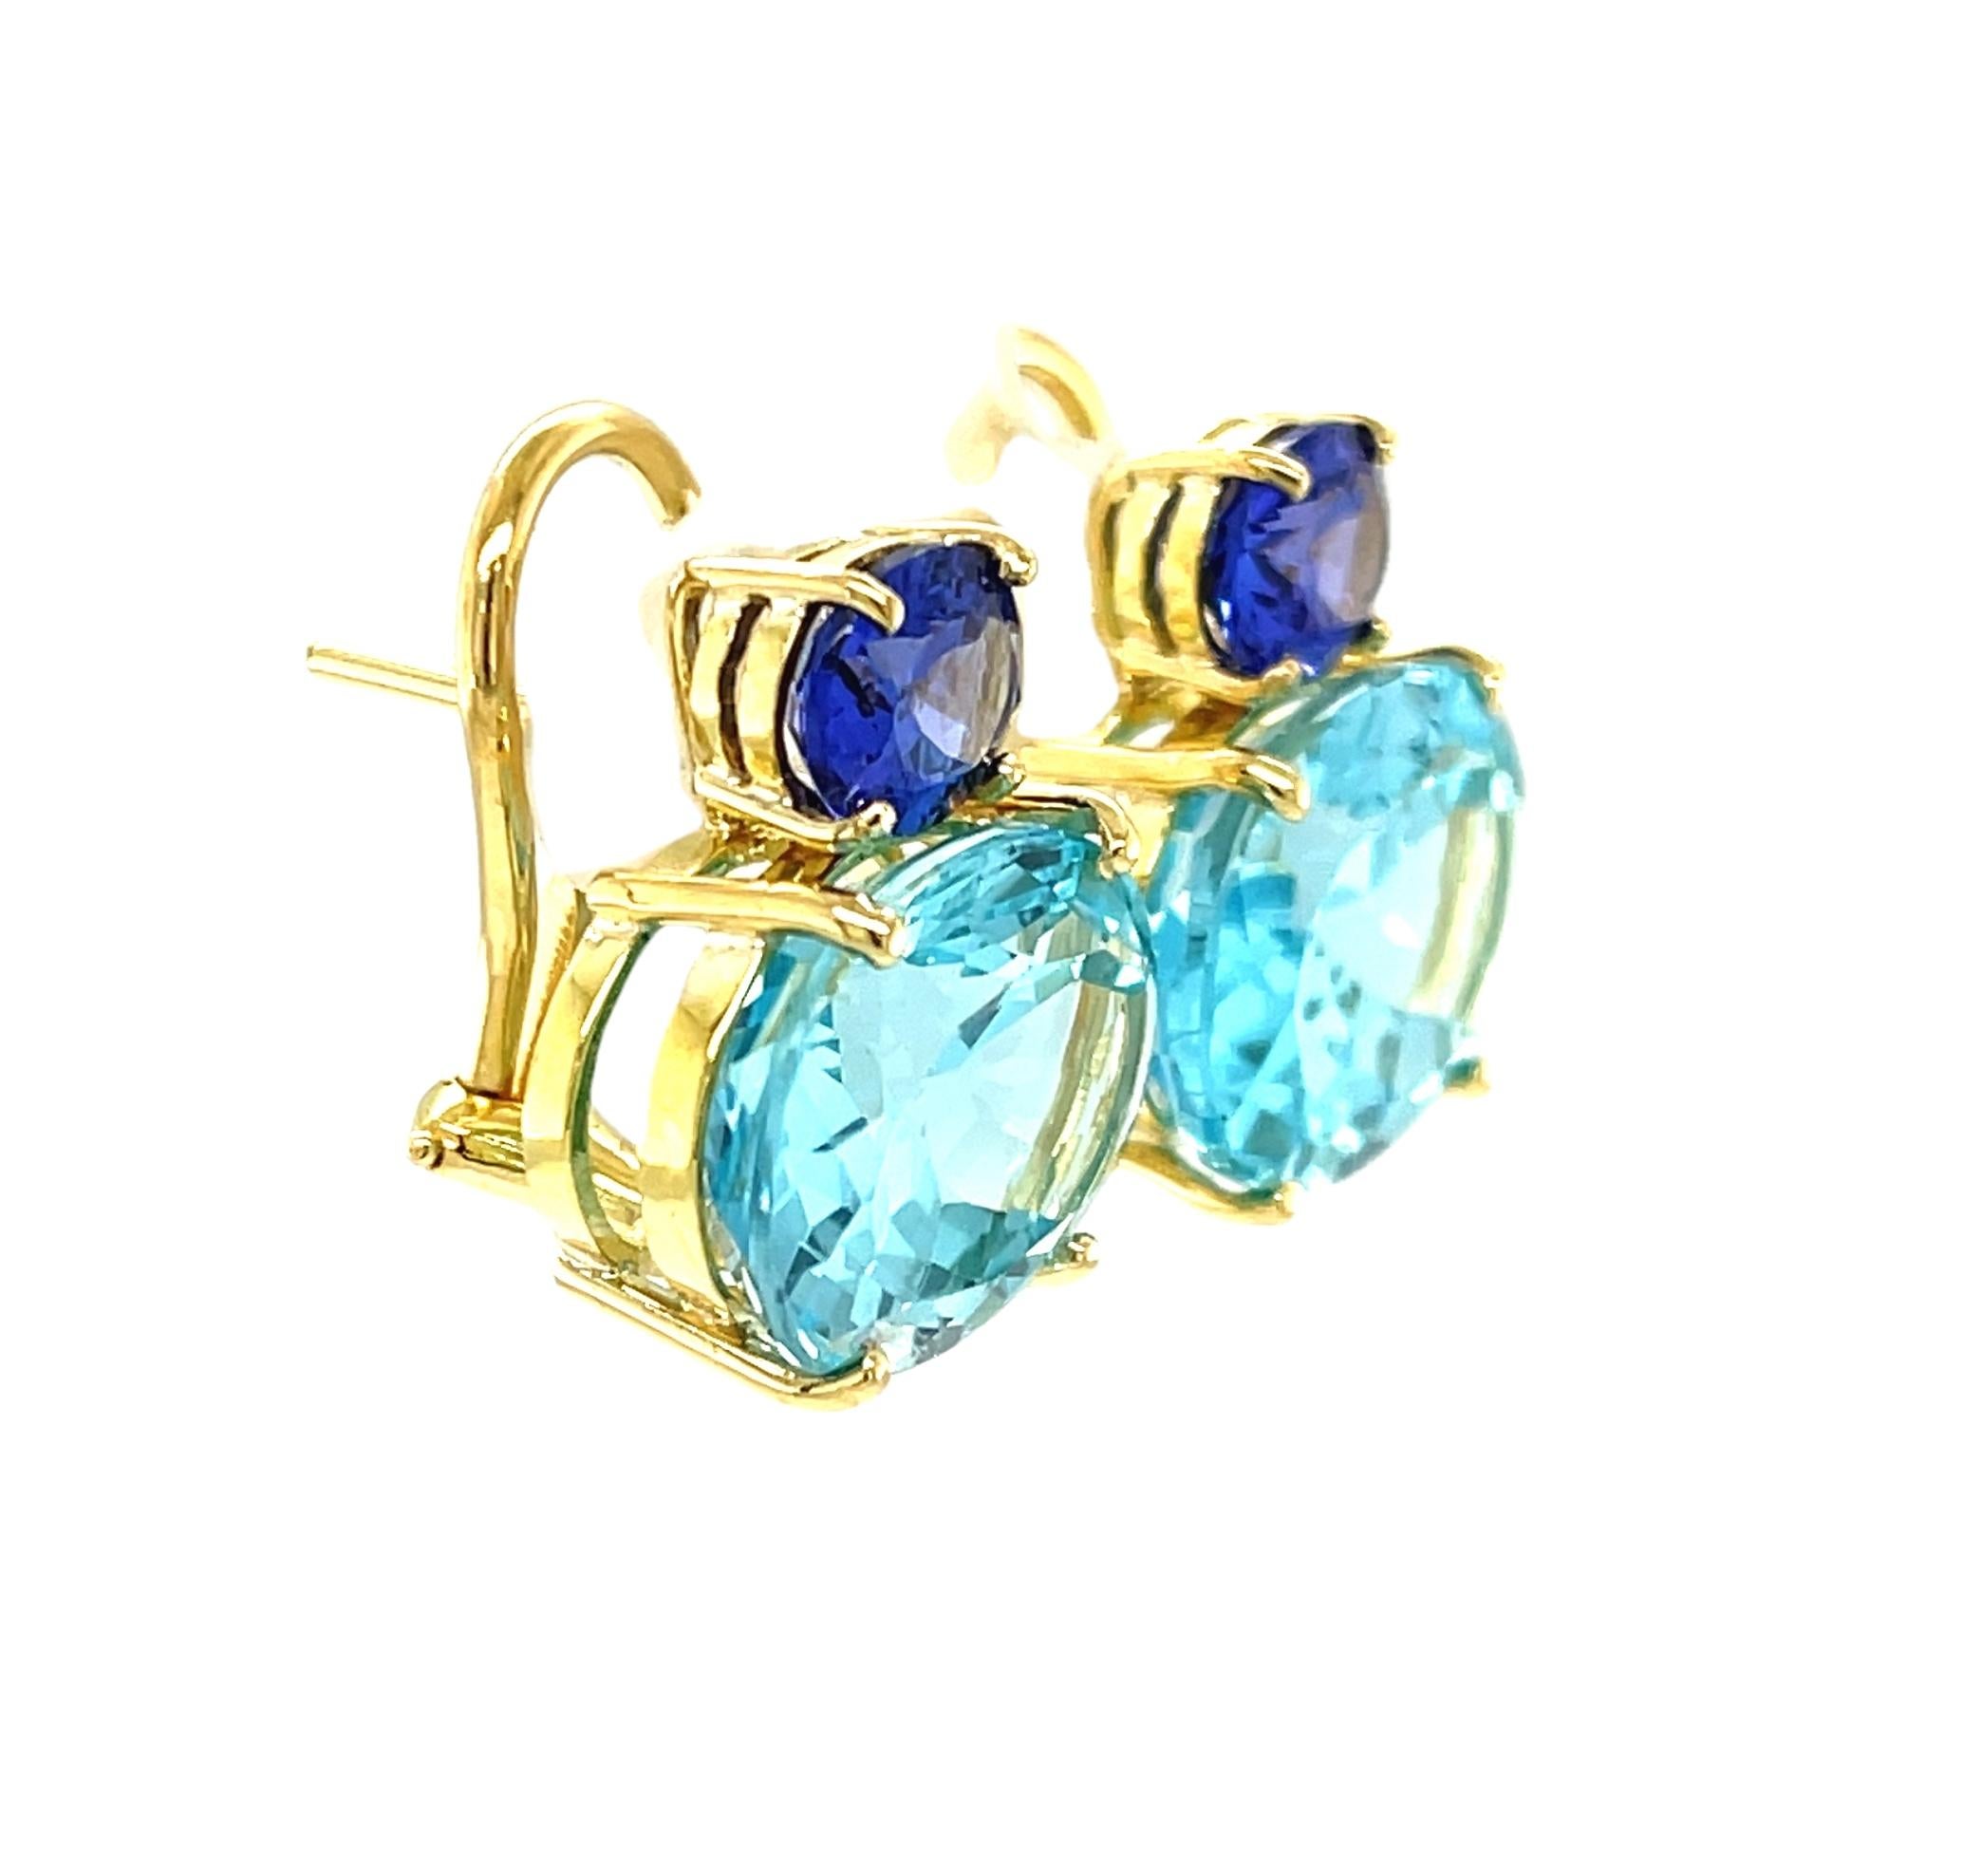 Tanzanite & Swiss Blue Topaz Earrings in 18k Yellow Gold with Omega Backs In New Condition For Sale In Los Angeles, CA